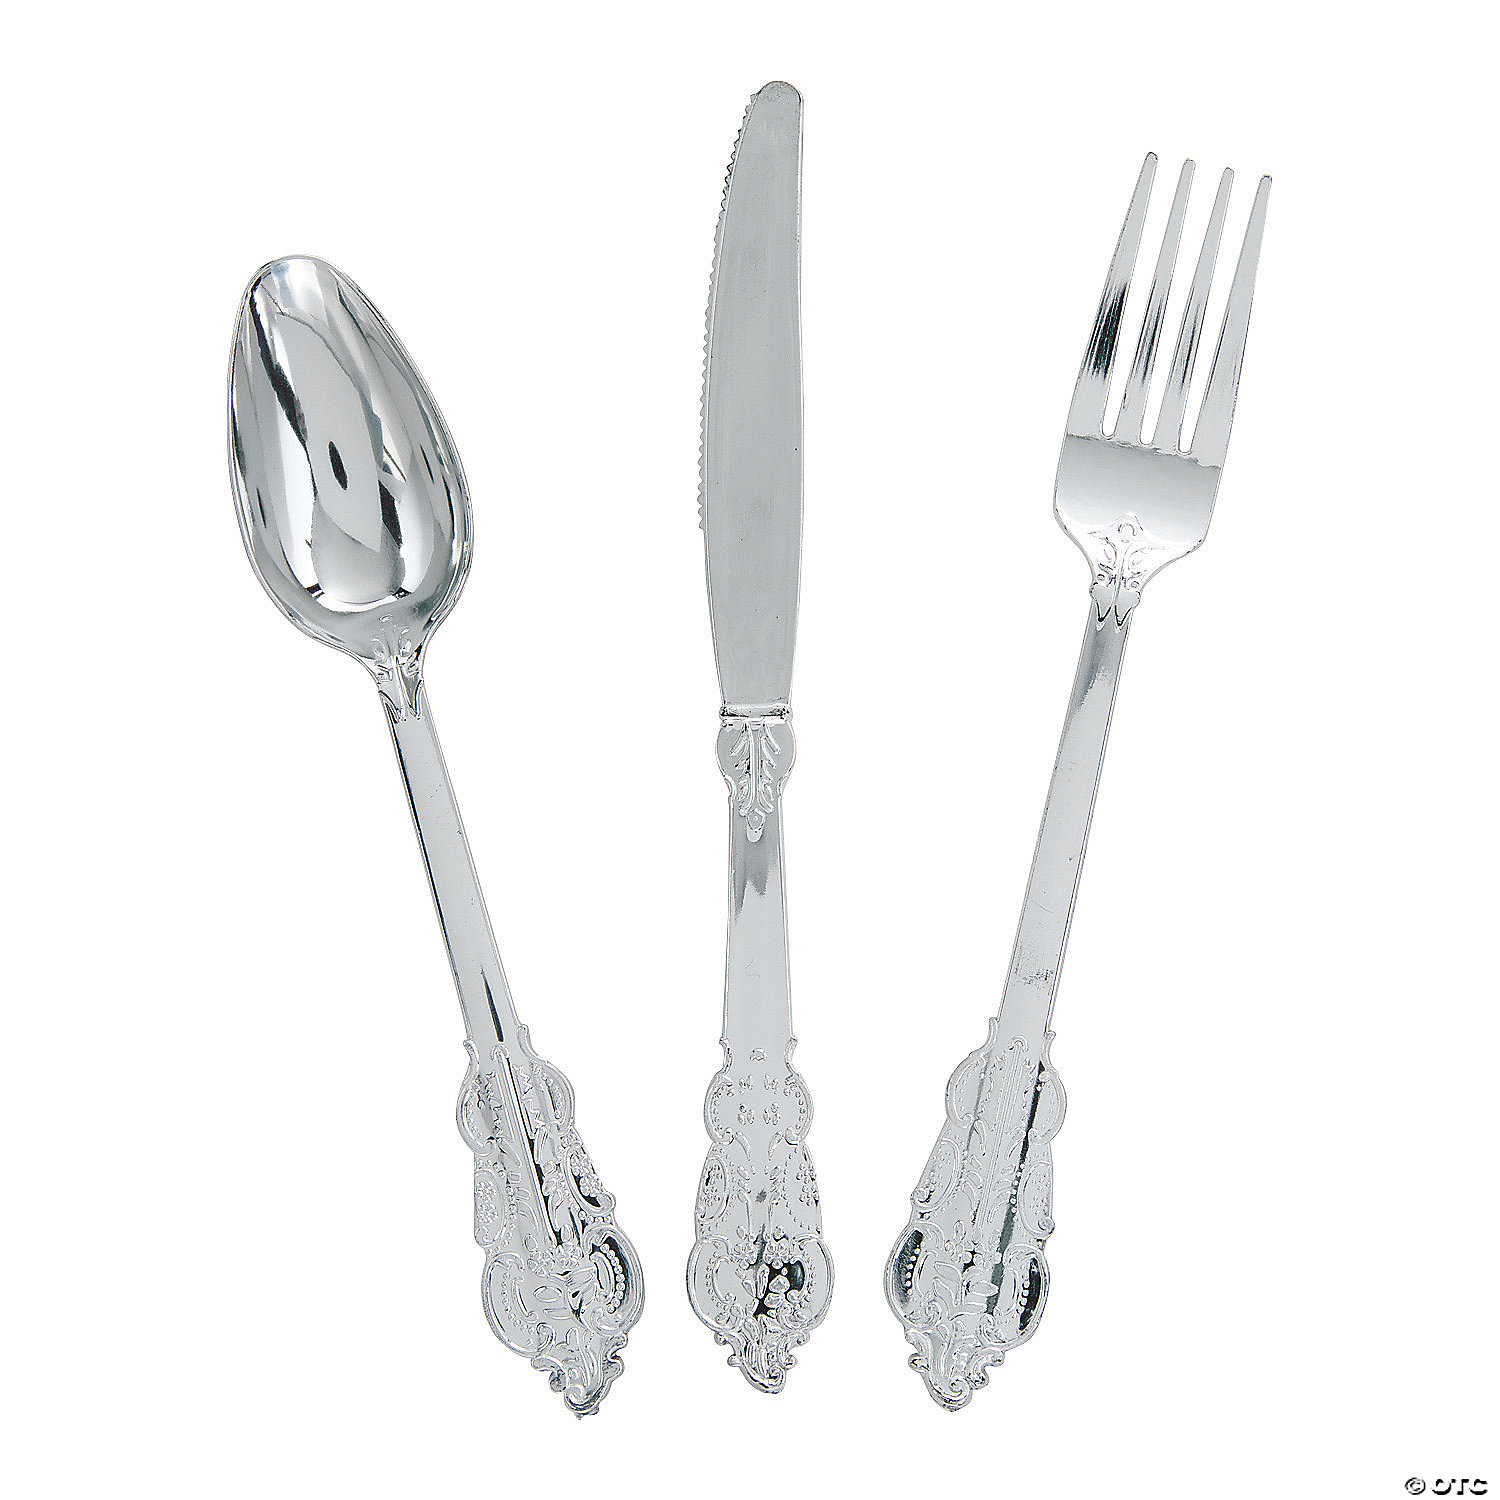 https://s7.orientaltrading.com/is/image/OrientalTrading/VIEWER_ZOOM/premium-ornate-silver-plastic-cutlery-sets-24-ct~13959023